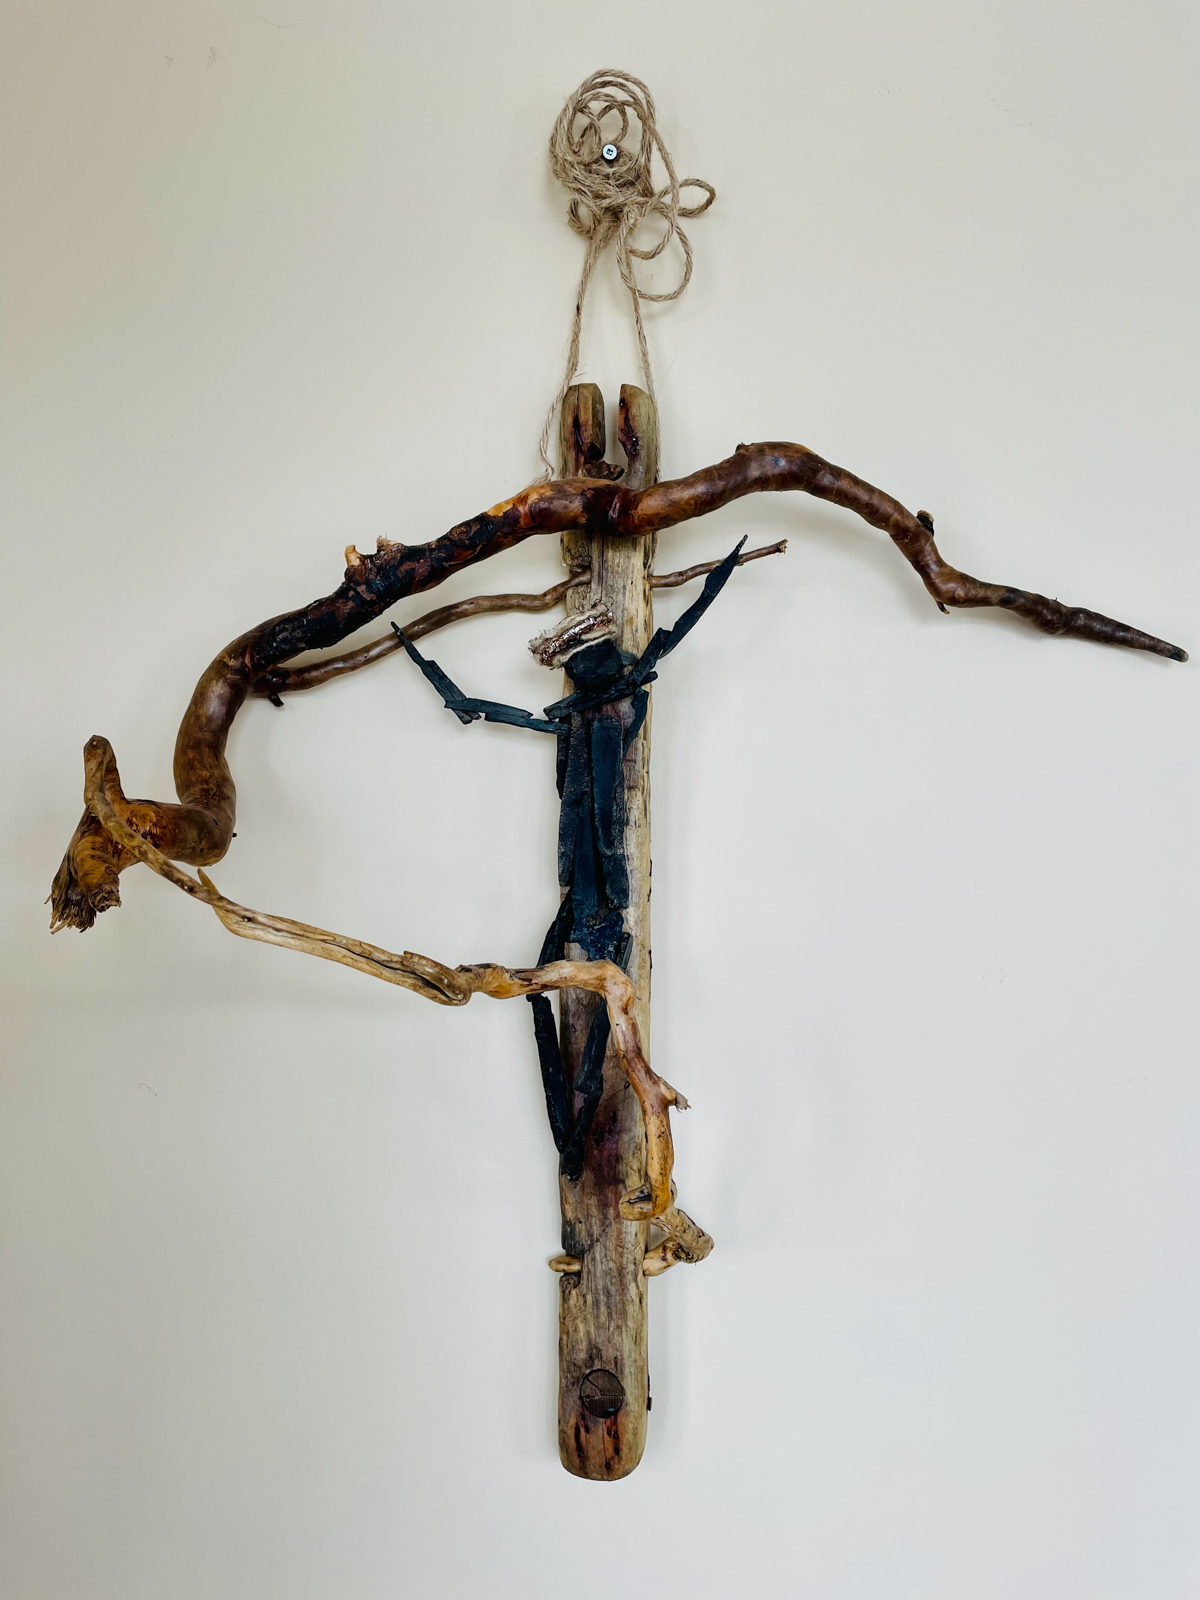 Christ on the Cross — This crucified Christ image evokes the same awe and wonder religious relics might. The figure is made from lobster trap debris, driftwood root, and Grand Greve stone. In religious iconography, the crossbeam represents the person crucified and this one appears to be in motion. The crown of thorns is a circular rhinestone brooch bound in jute and copper fibre. (Photo: Cynthia Curtis)